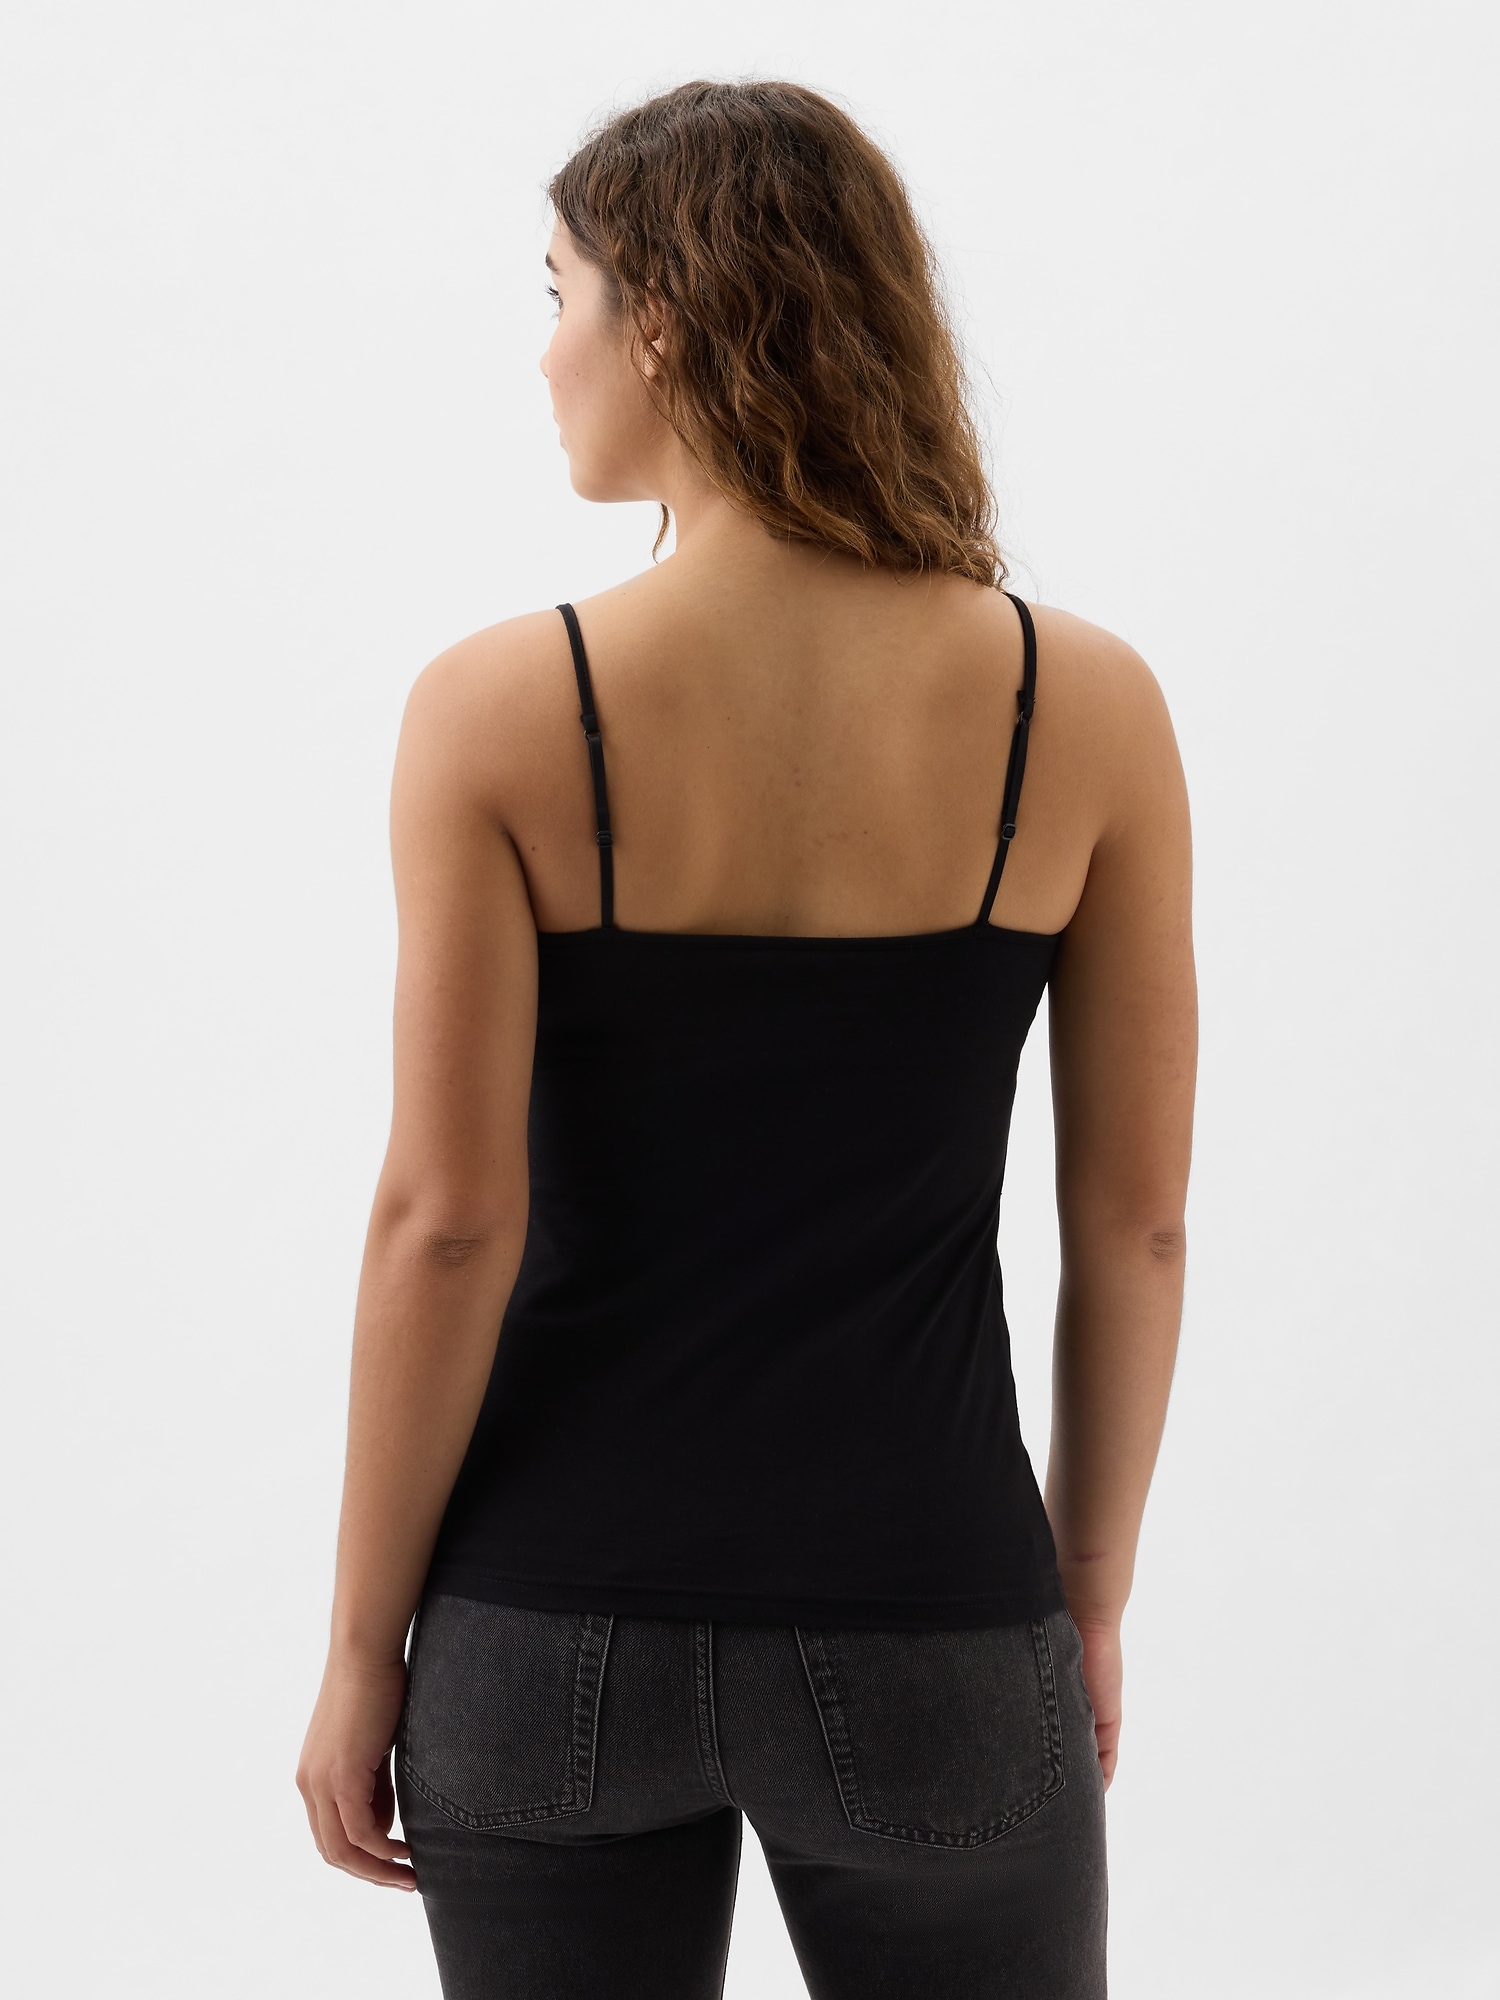 Going Semi-Braless: 15 Camisoles with Built-In Bras - The Breast Life